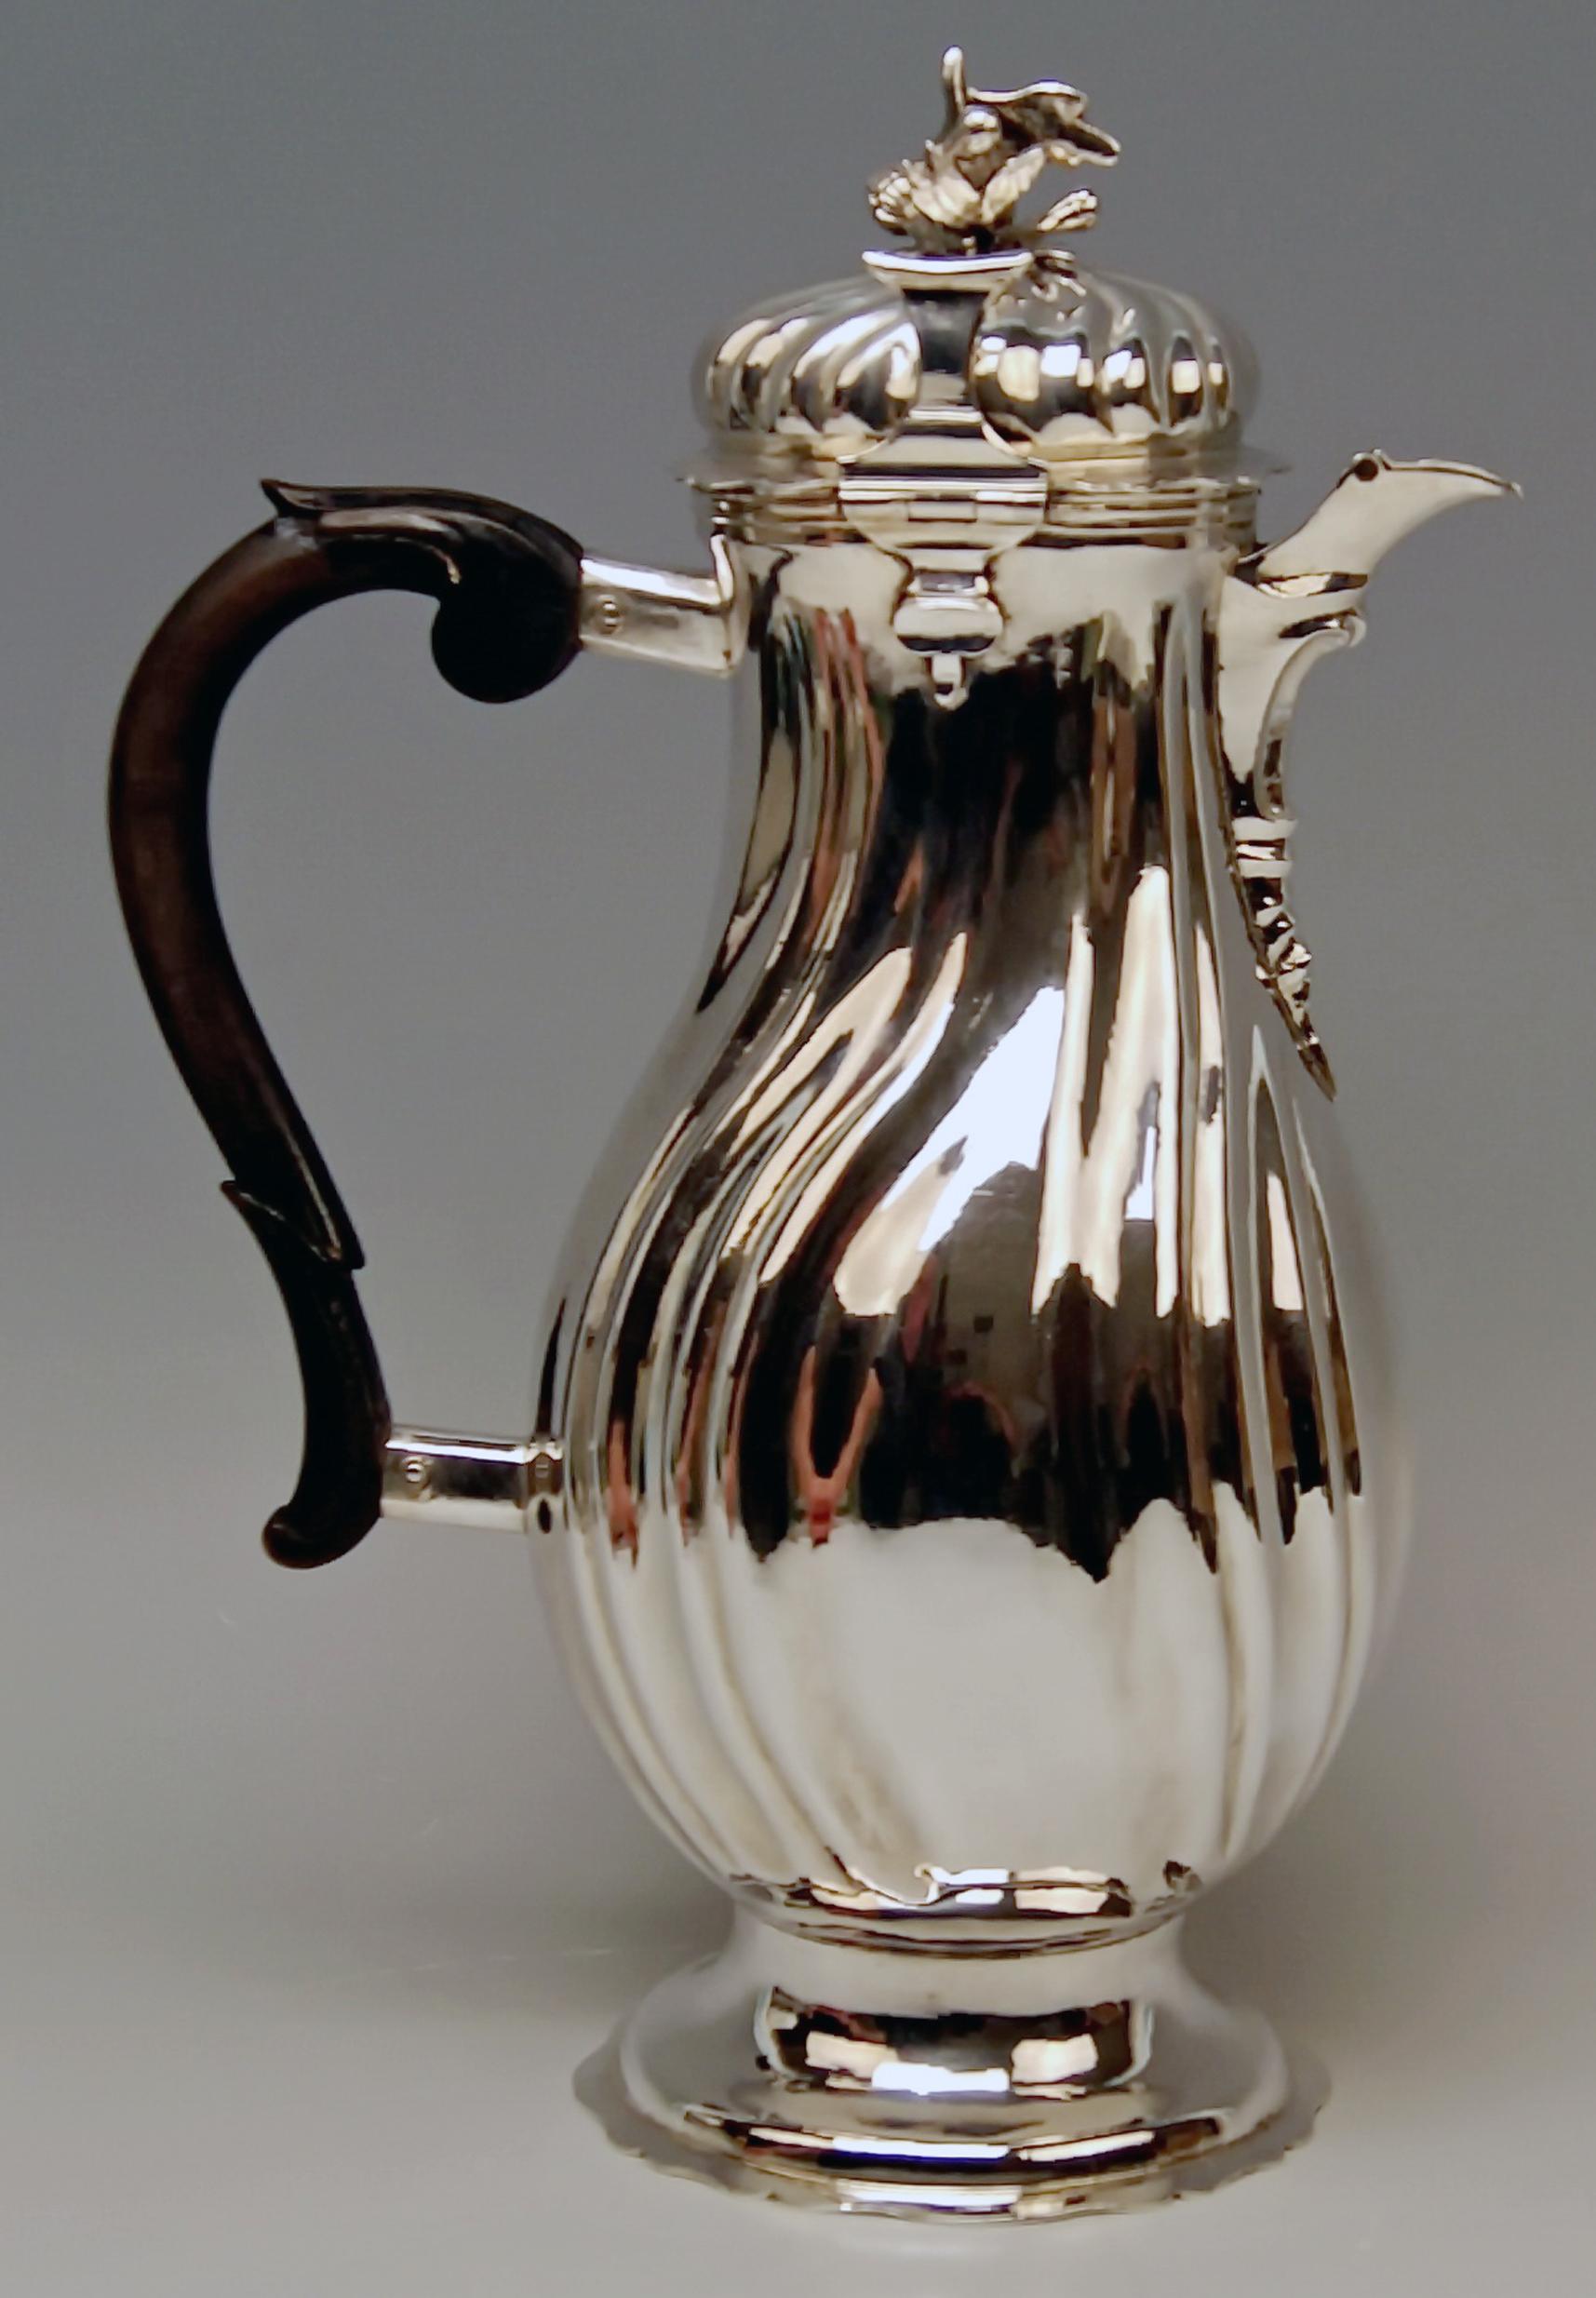 Gorgeous Coffee Pot of Rococo Period / form type: pear.

Made in Augsburg 1775-1777
Jakob Wilhelm Kolb (born c. 1743 in Stuttgart/Germany - died 1782) / he became master in year 1768.

Specifications:
Made of silver / finest manufacturing